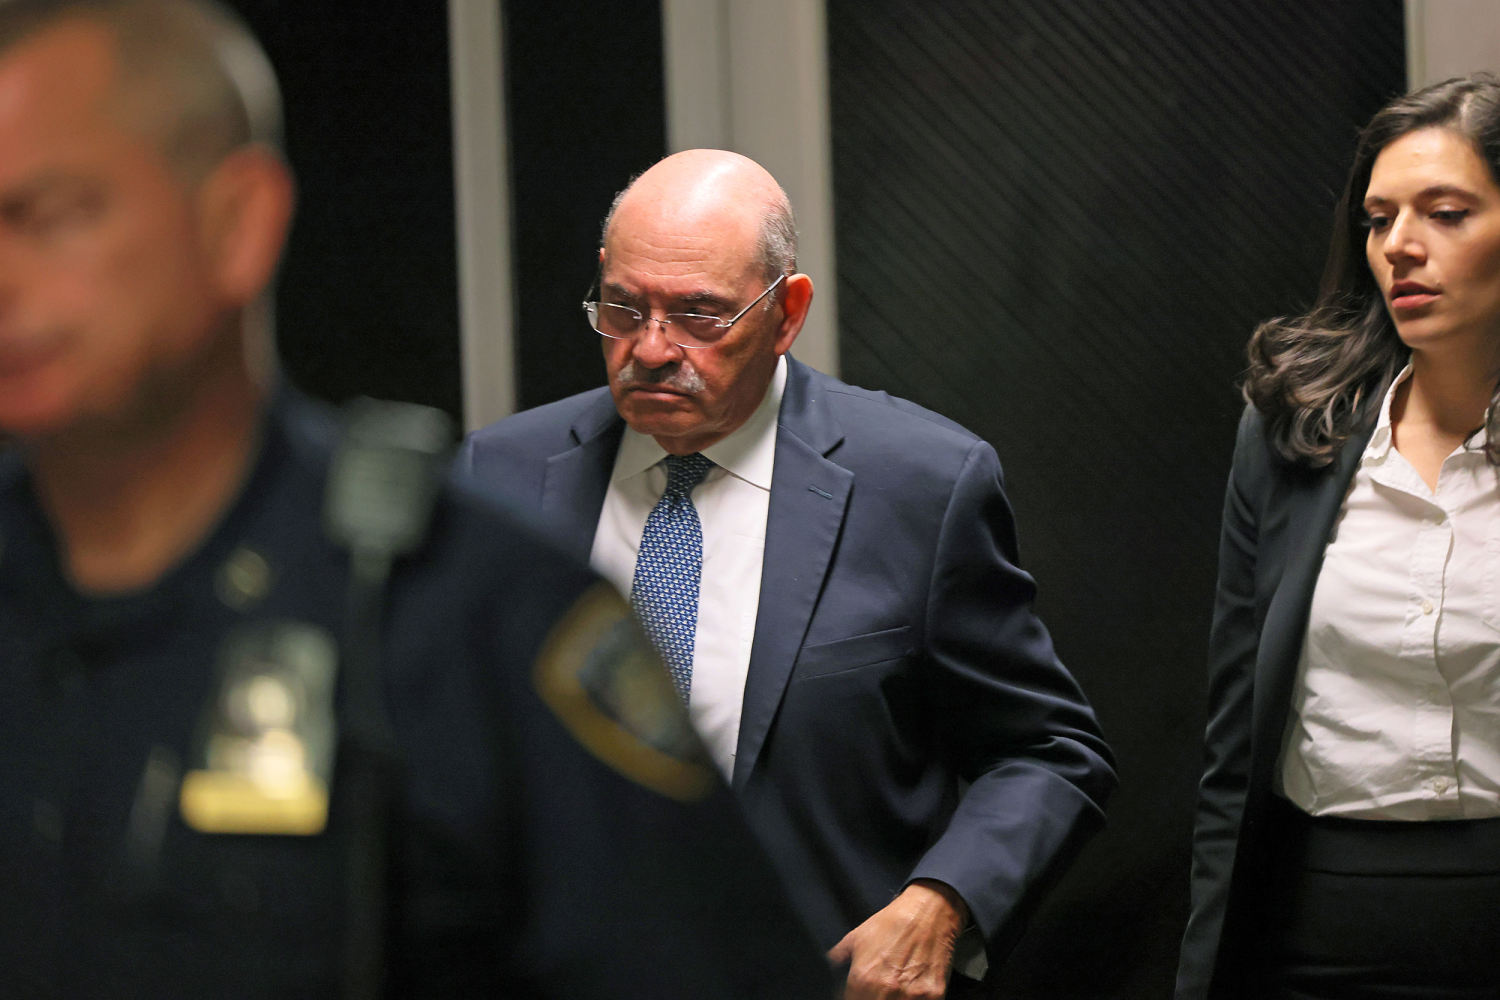 Former Trump Organization CFO Allen Weisselberg expected to plead guilty to perjury from civil fraud trial